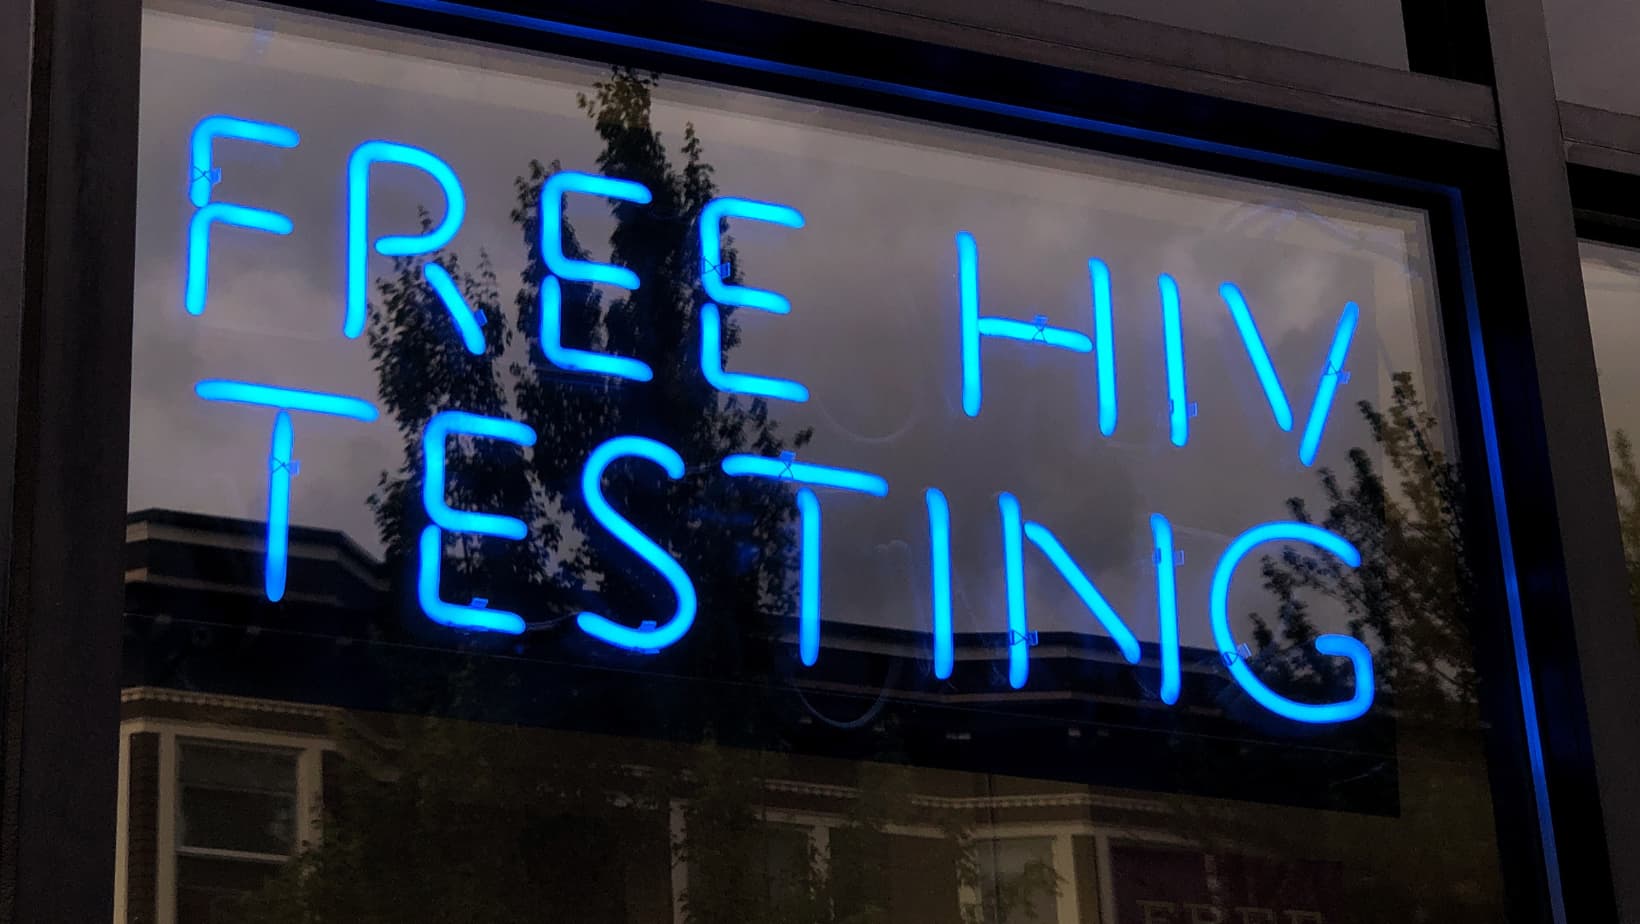 Test immediately if you suspect HIV exposure.